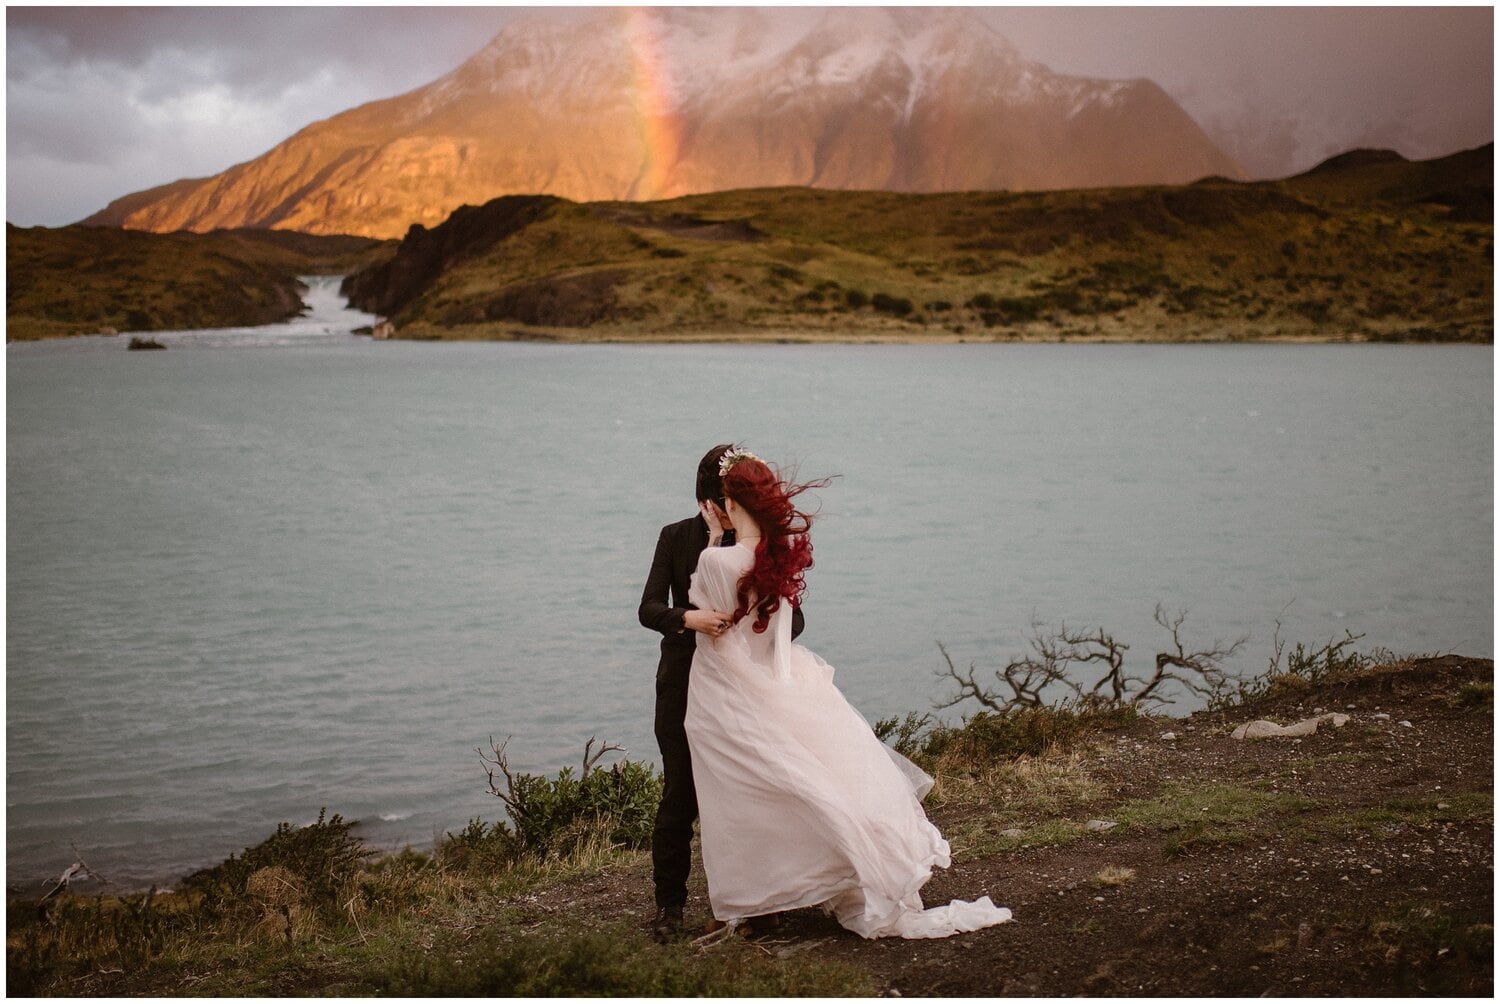 A couple embraces on their wedding day in Patagonia.